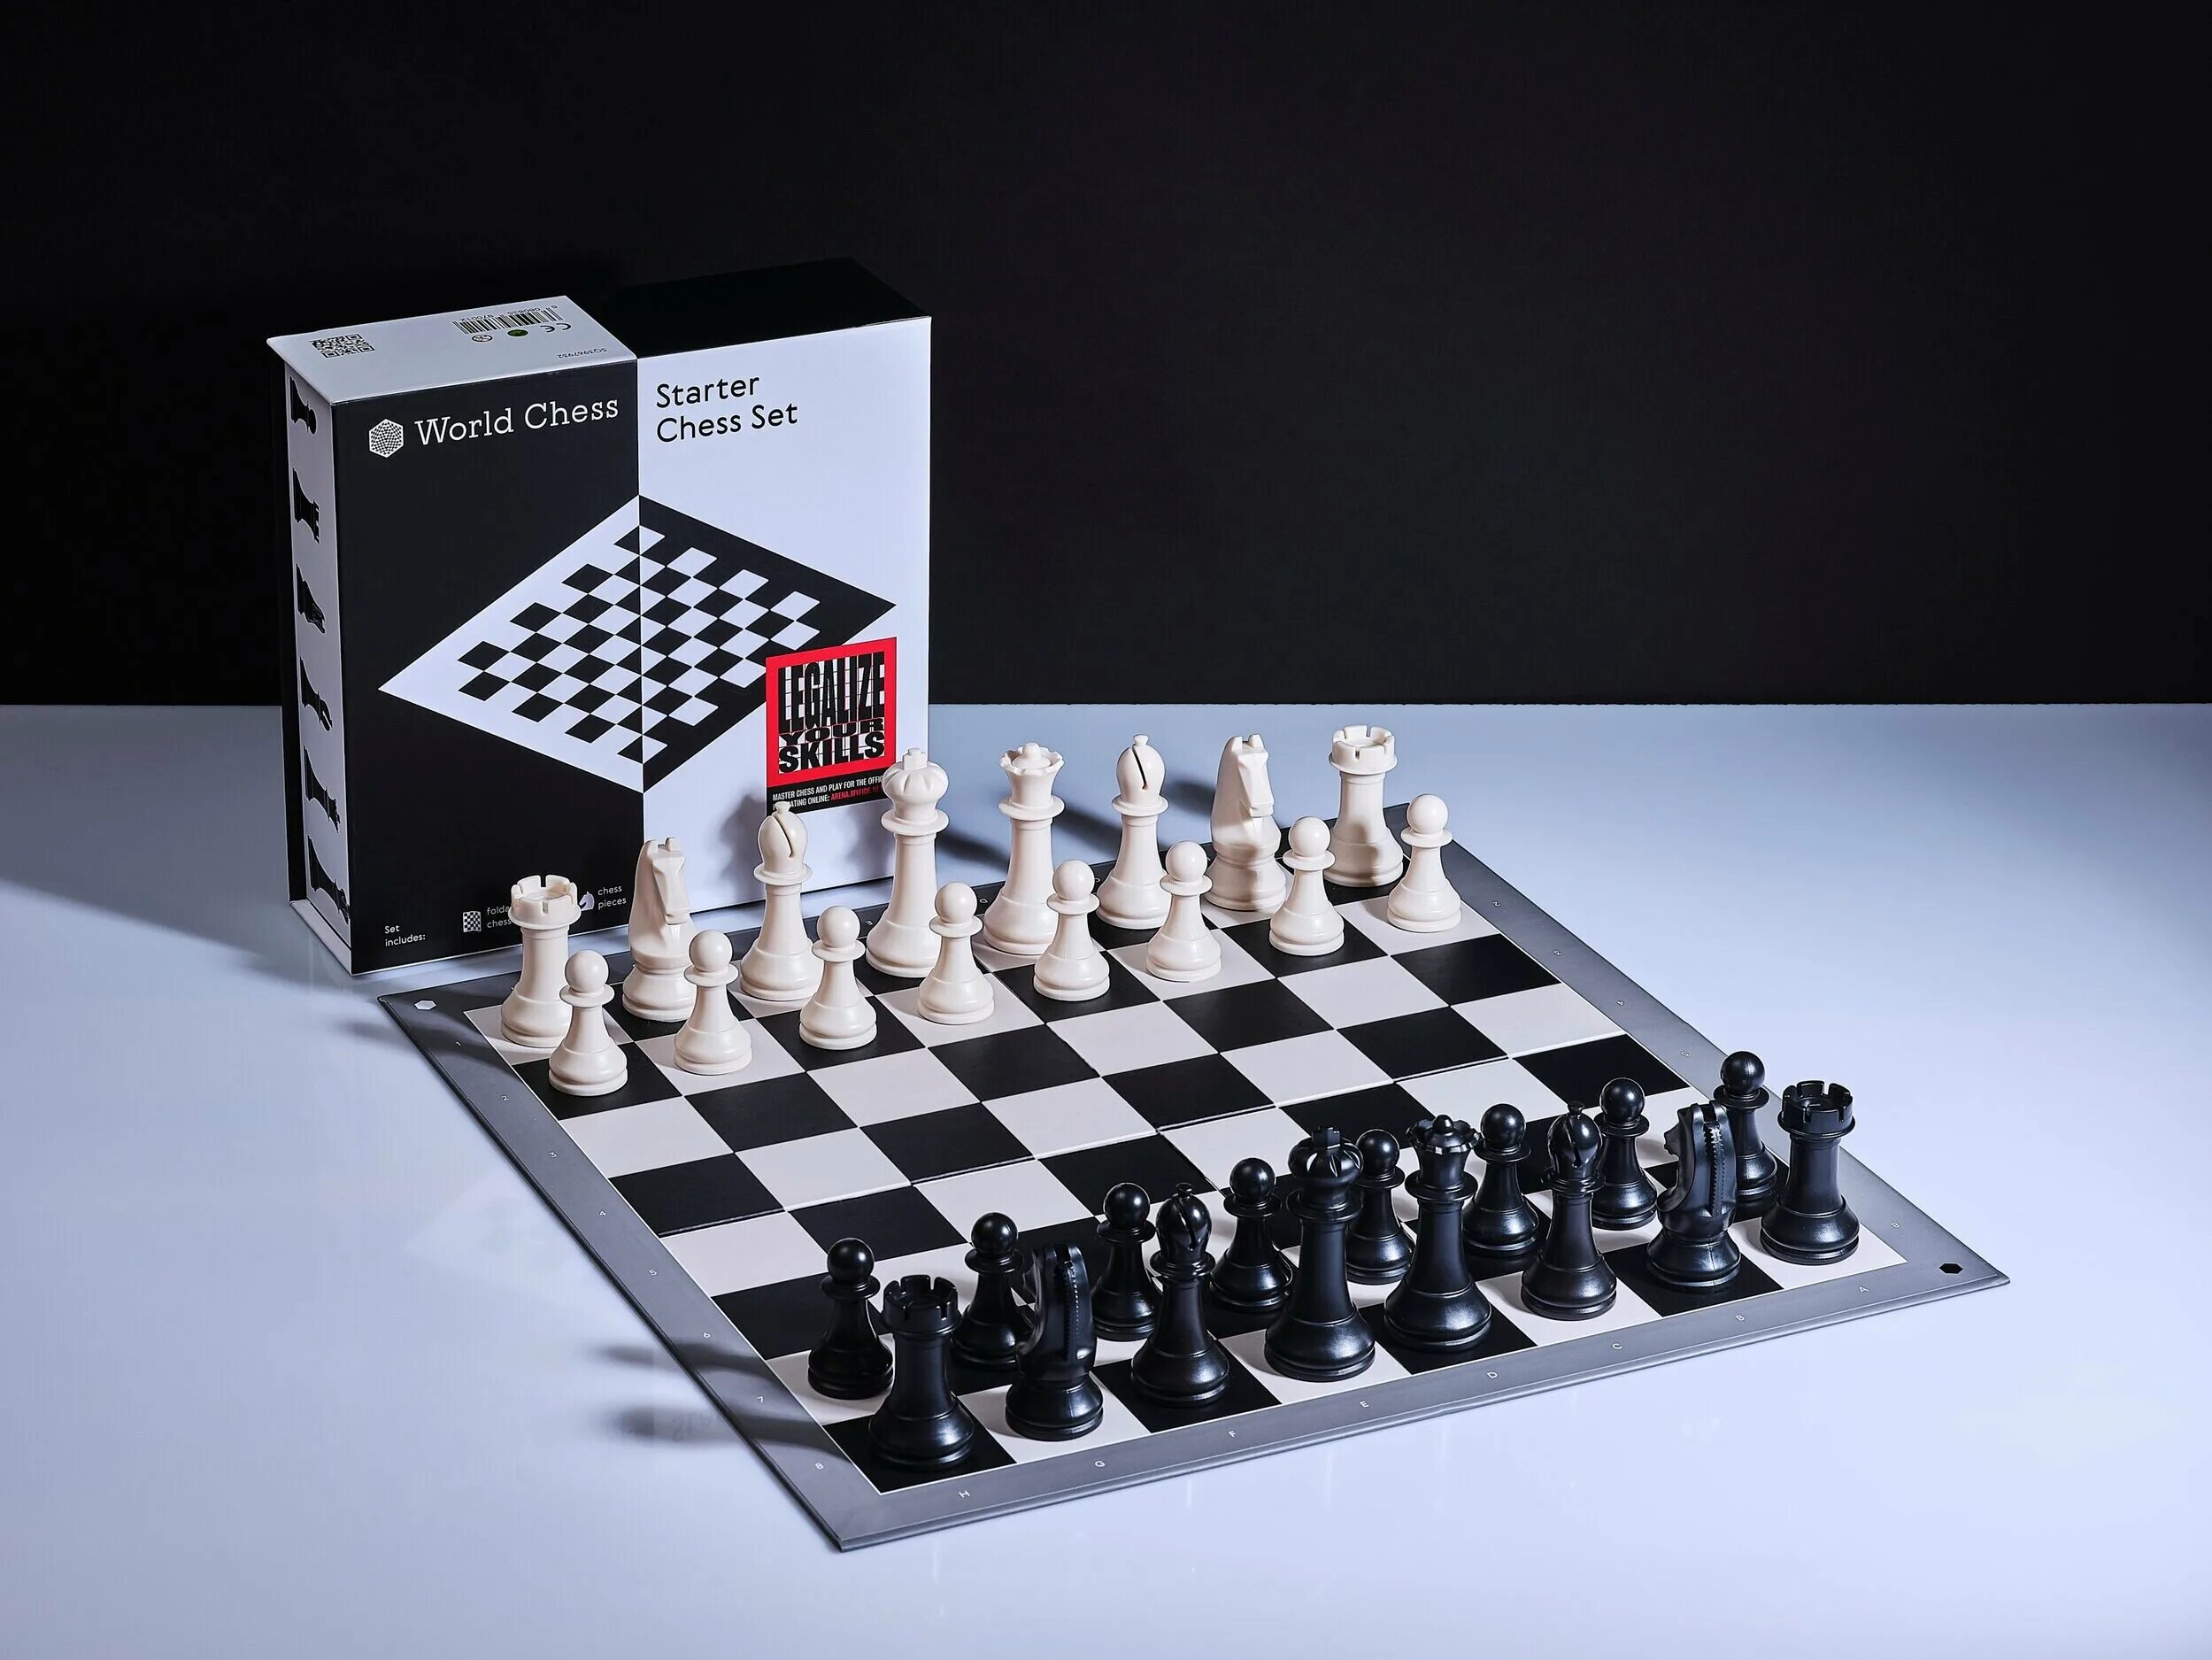 Fide chess. Шахматный набор World Chess Starter Chess Set. Official Fide World Championship Chess Set. Шахматы Garry Kasparov Championship. World Chess Championship Set (Academy Edition).